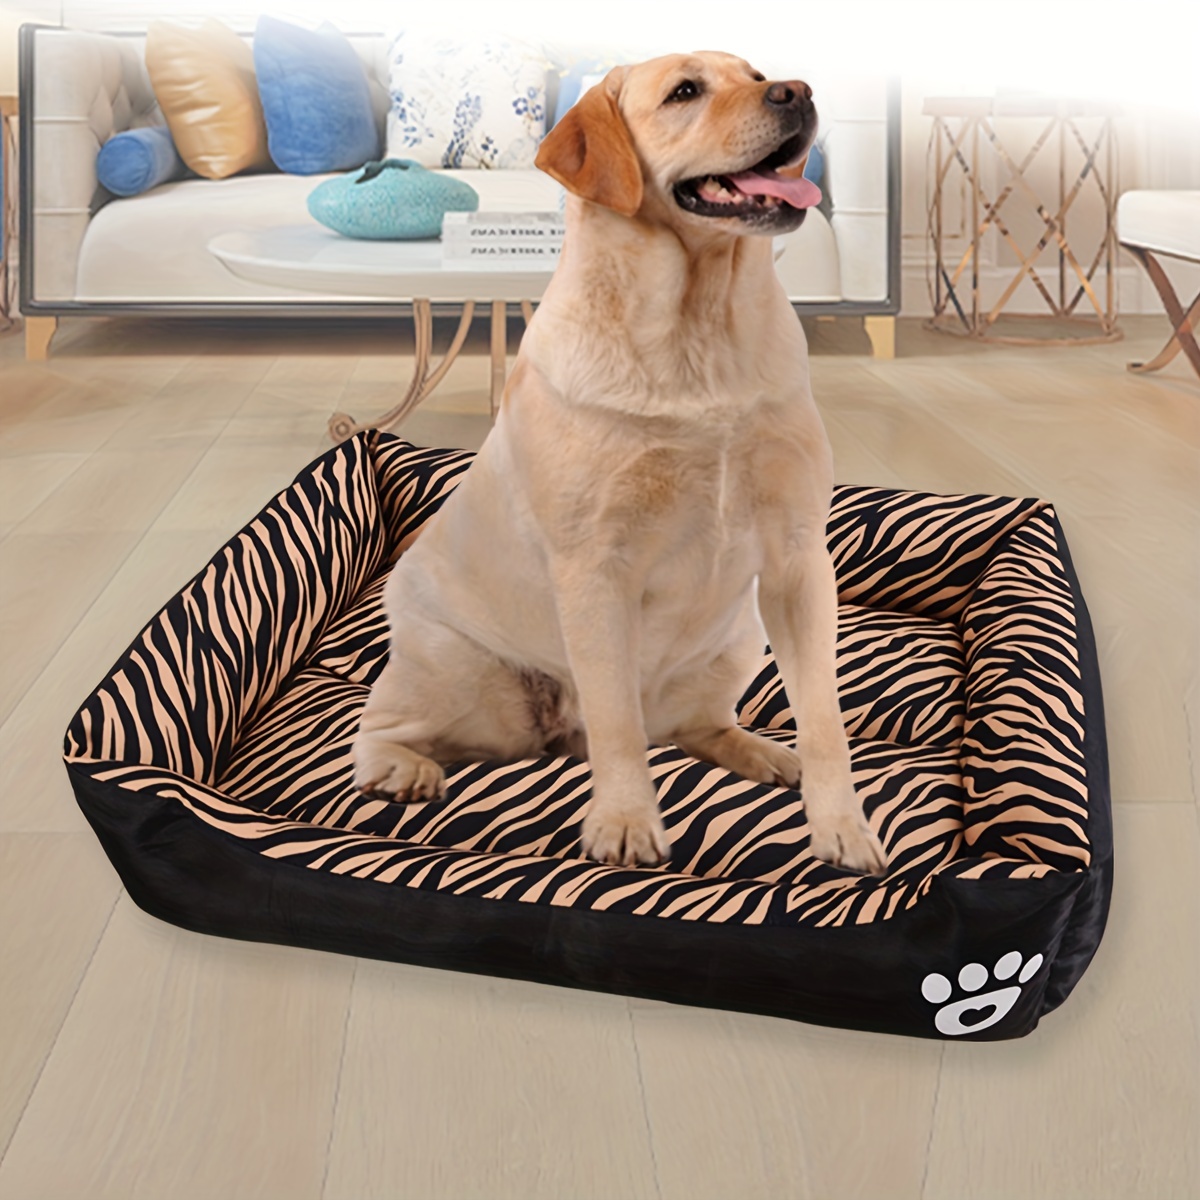 

Plush Dog Bed In Multiple Sizes - Soft Polyester Fiber Rectangle Pet Mat With Paw Print Design For Extra Small To Large Dog Breeds